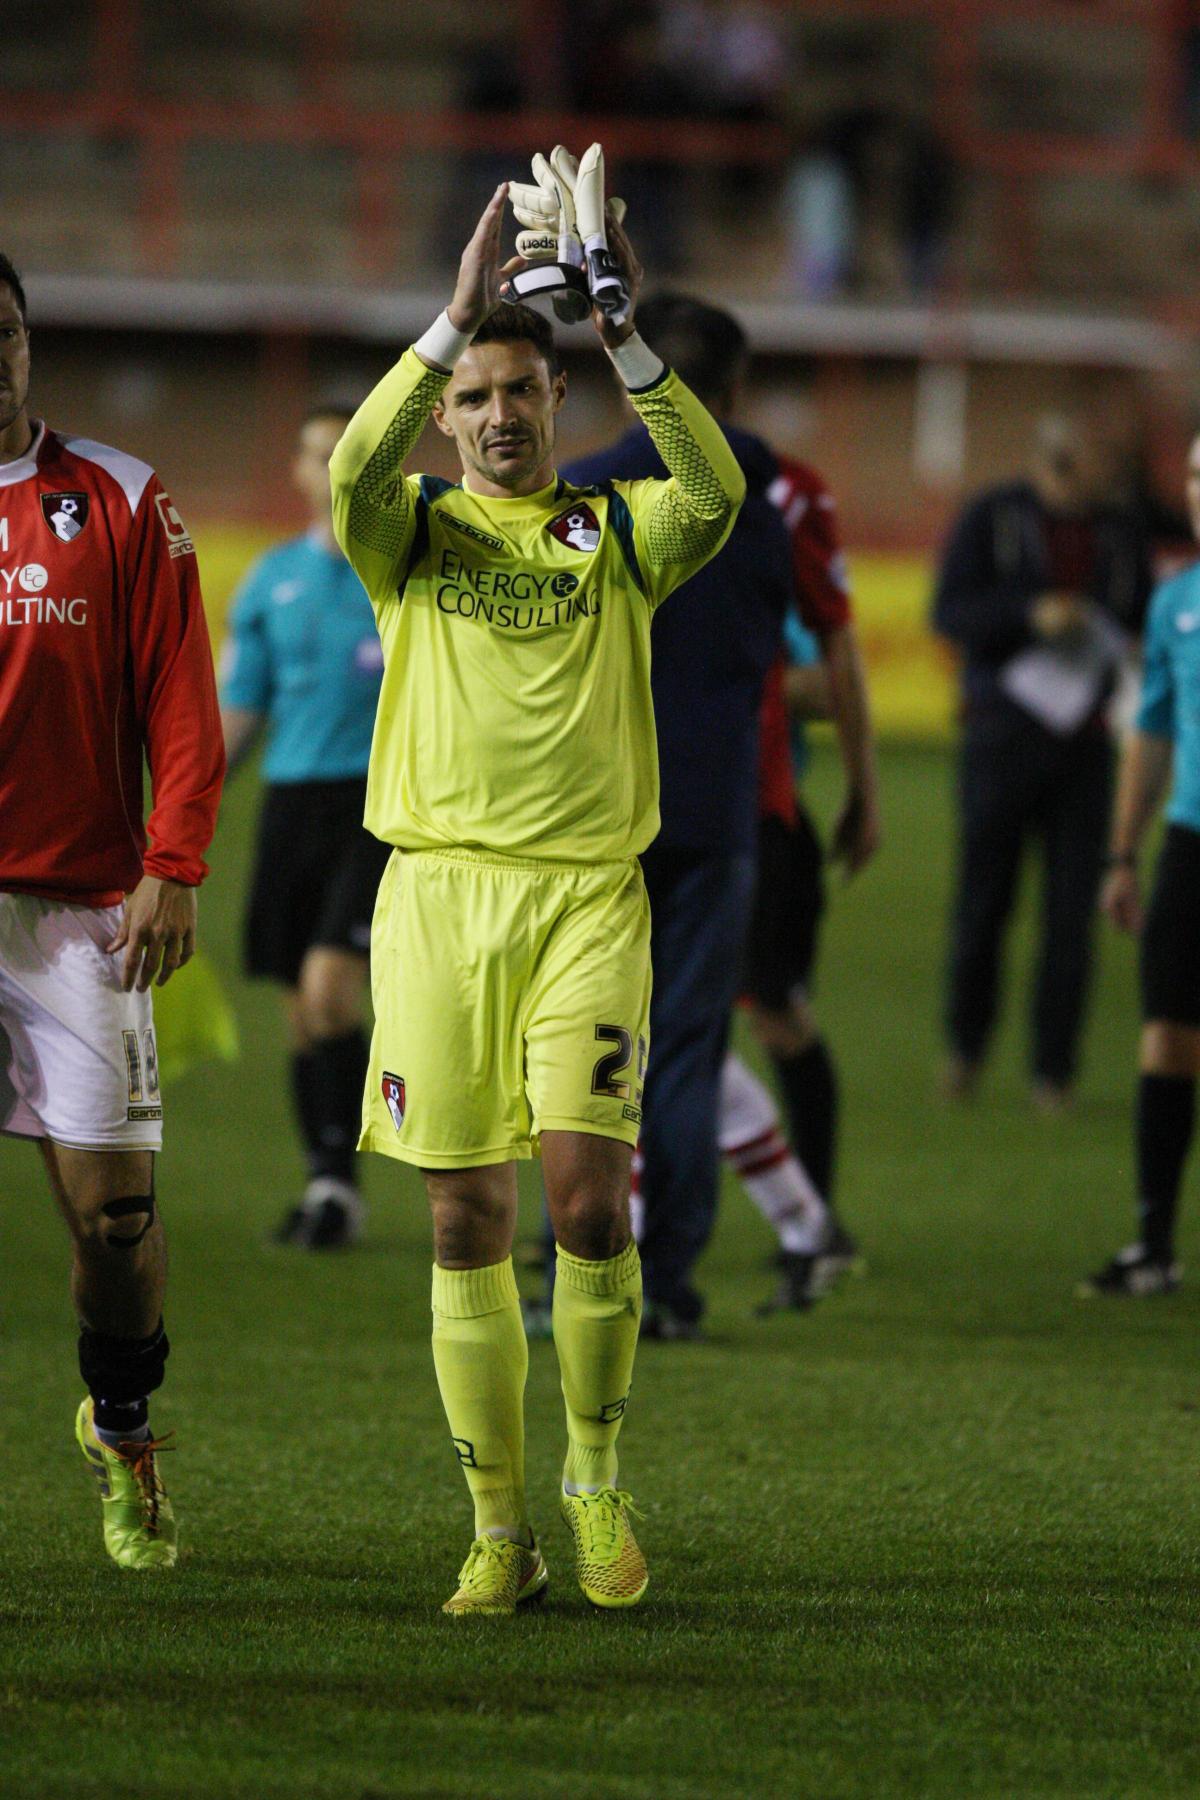 All our pictures of Exeter v AFC Bournemouth in the Capital One League Cup first round